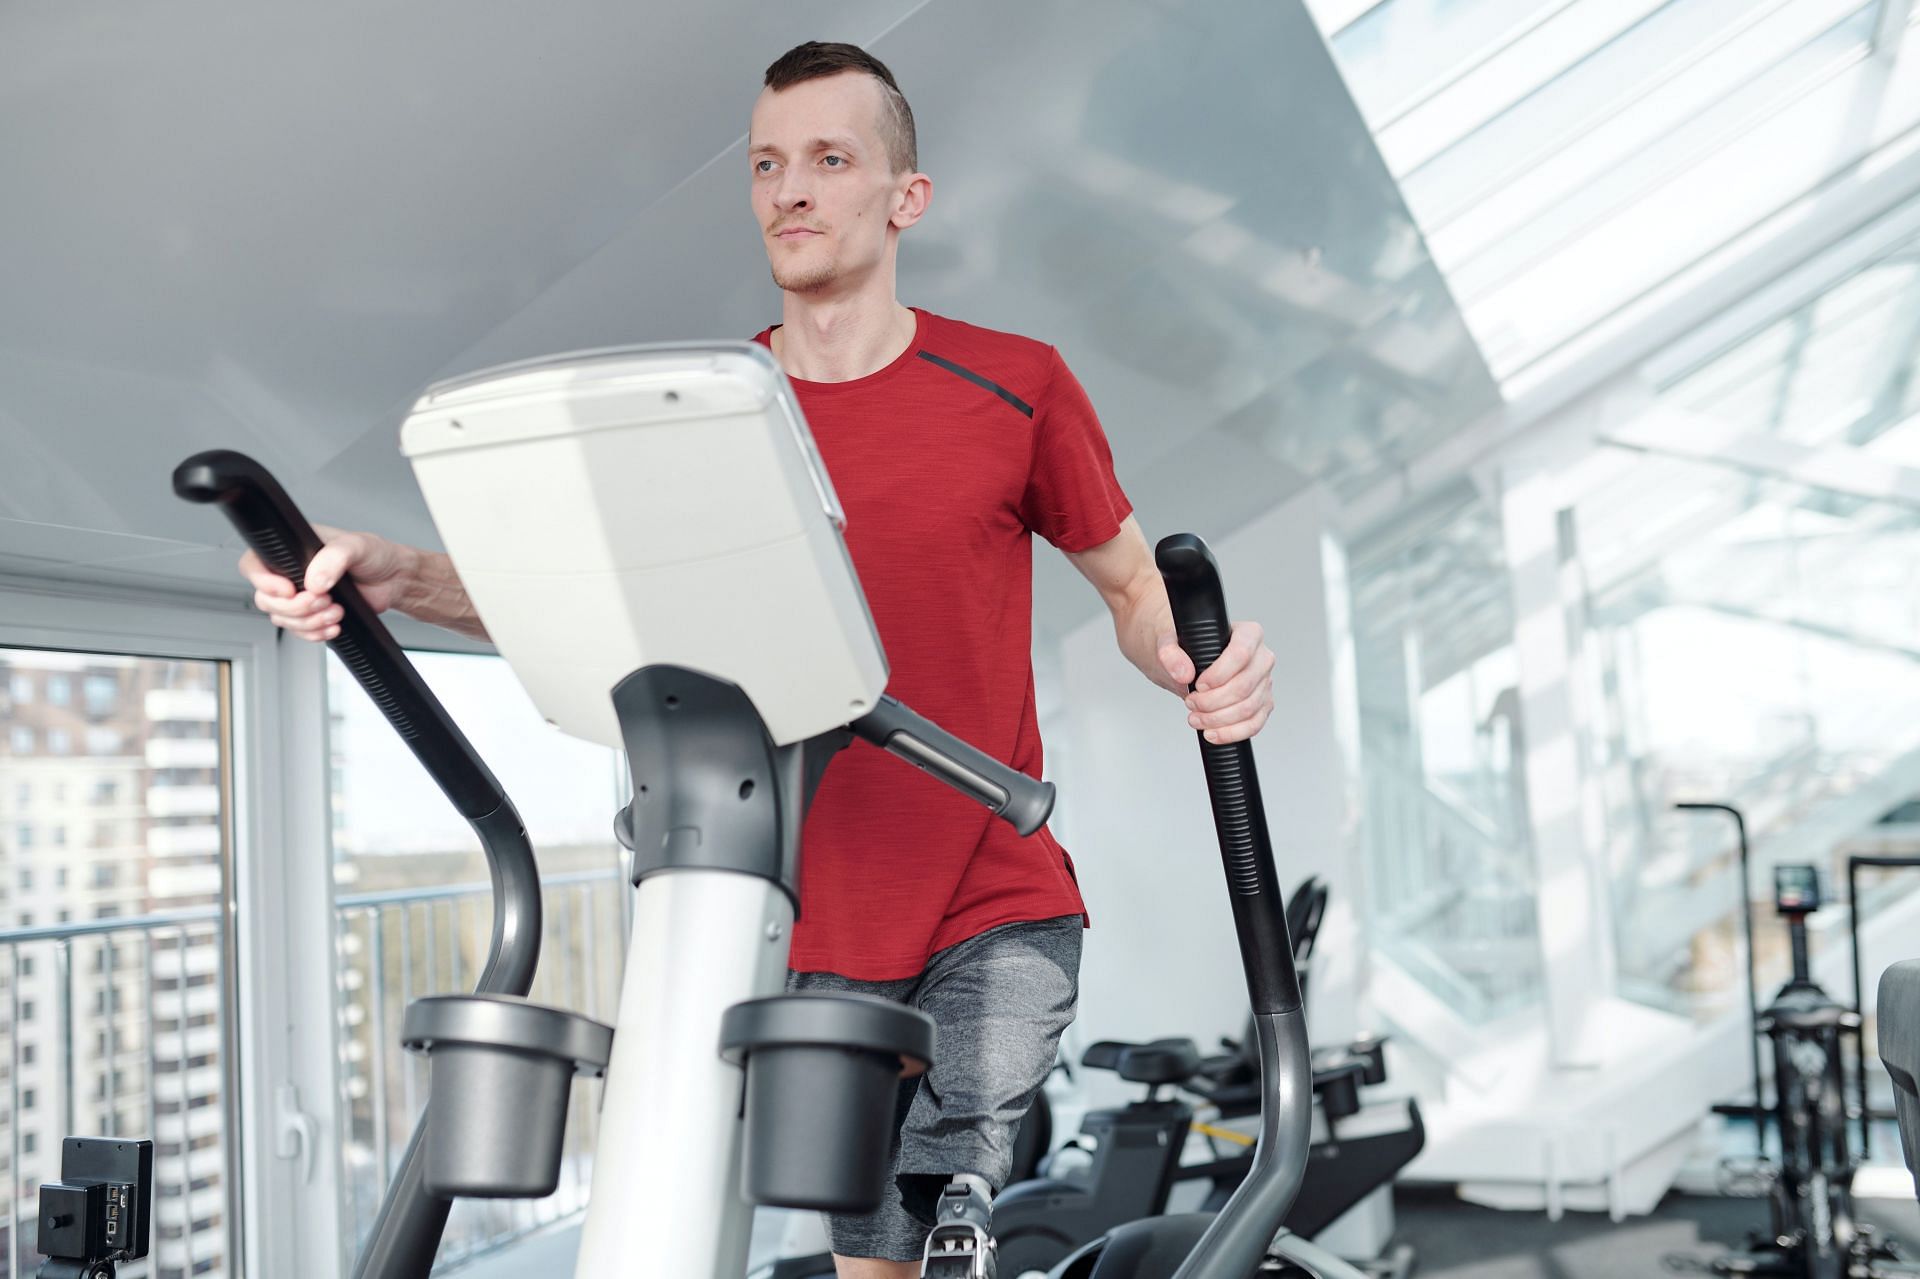 Here are the best elliptical machine exercises to try at home! (Image via pexels/ShotPot)